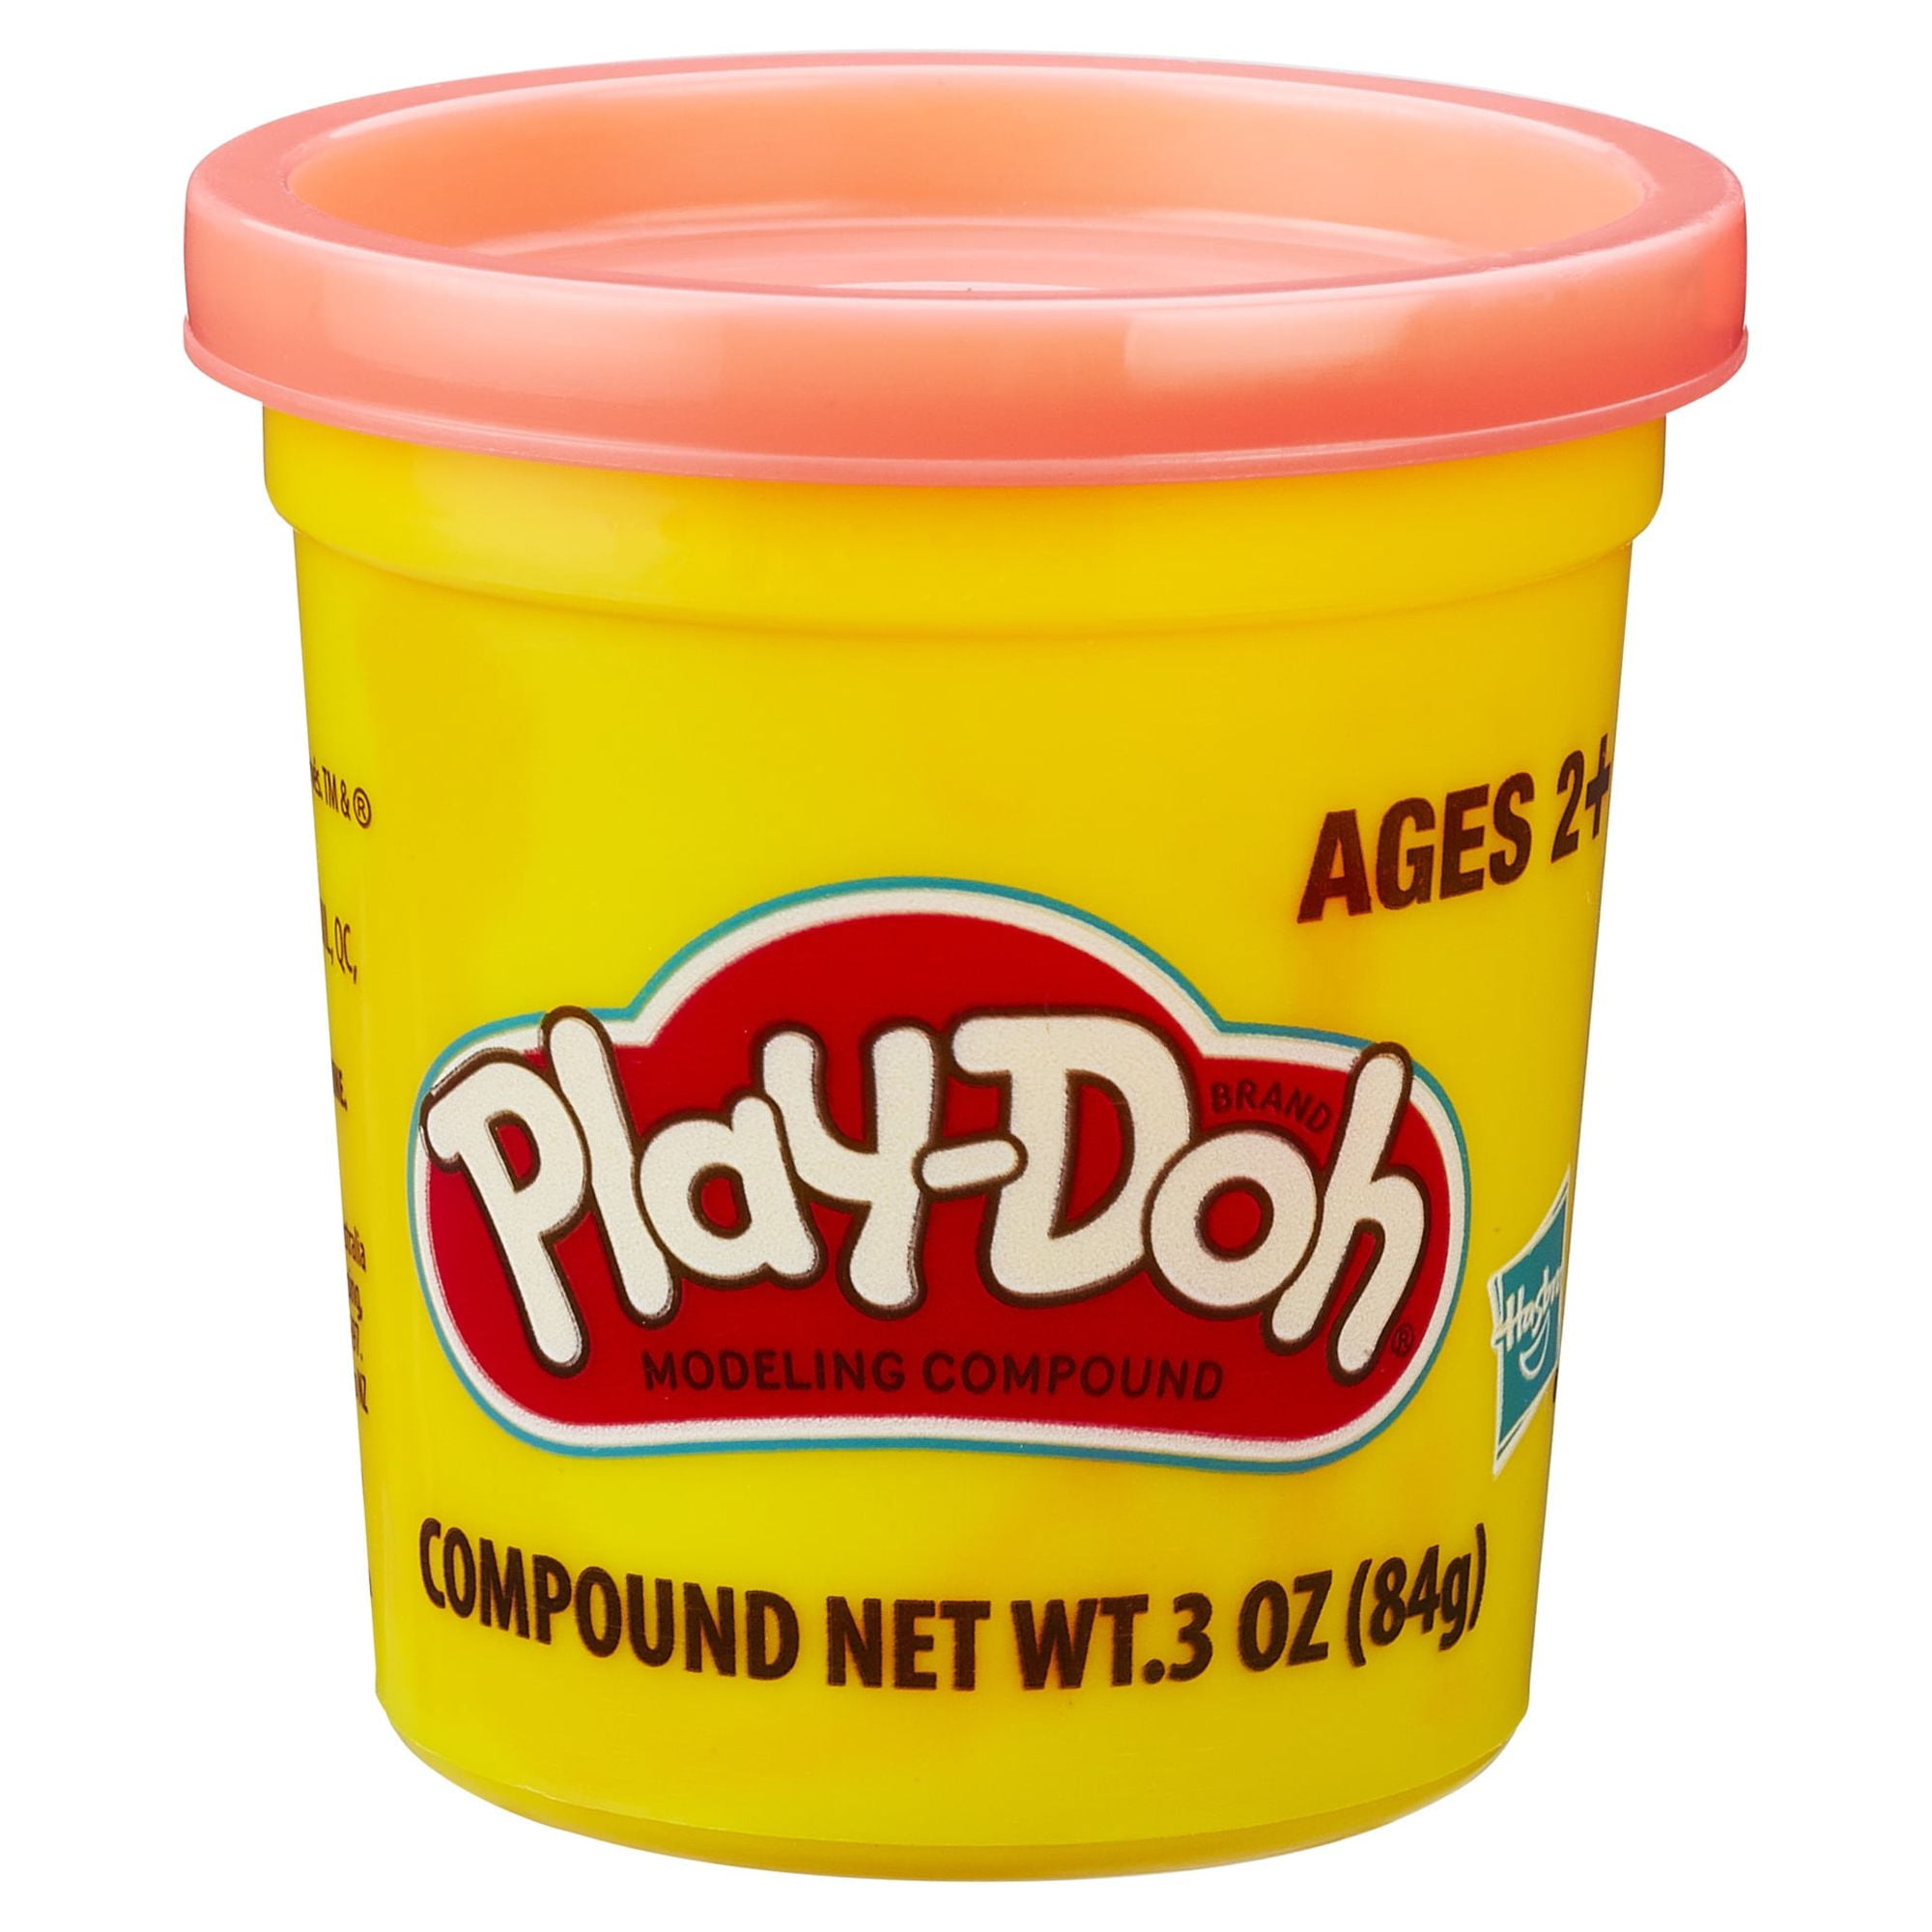 Play-Doh Modeling Compound Play Dough Can - Pink (3 oz)